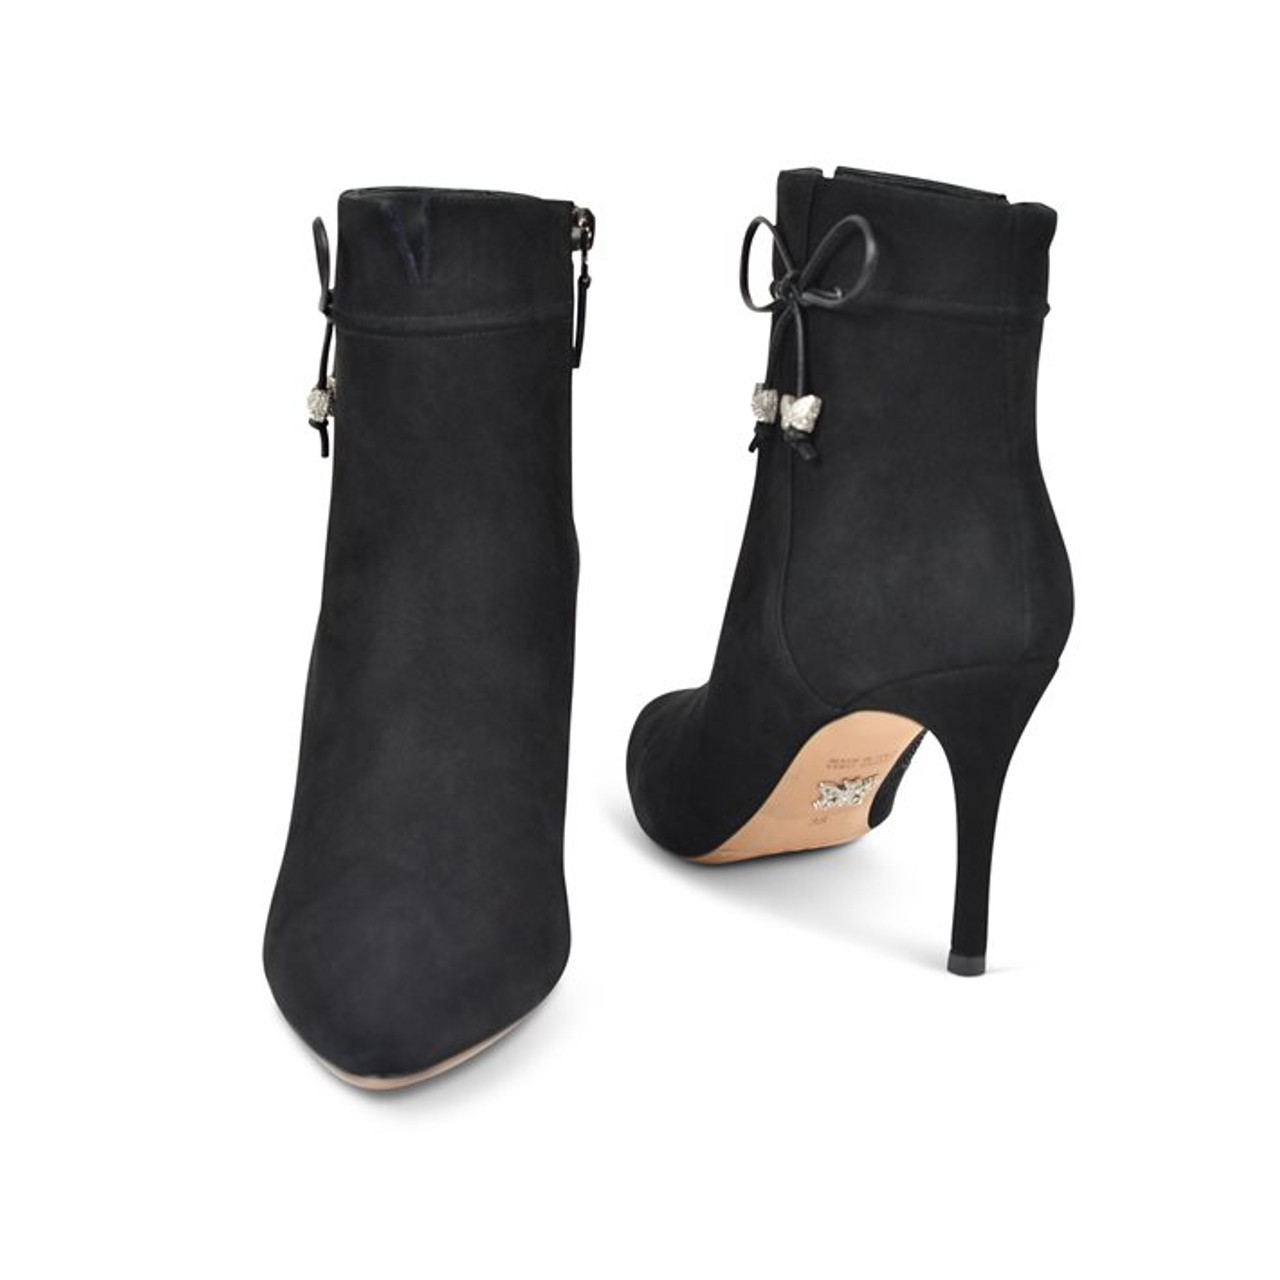 Grosvenor Ankle Boot Black Suede